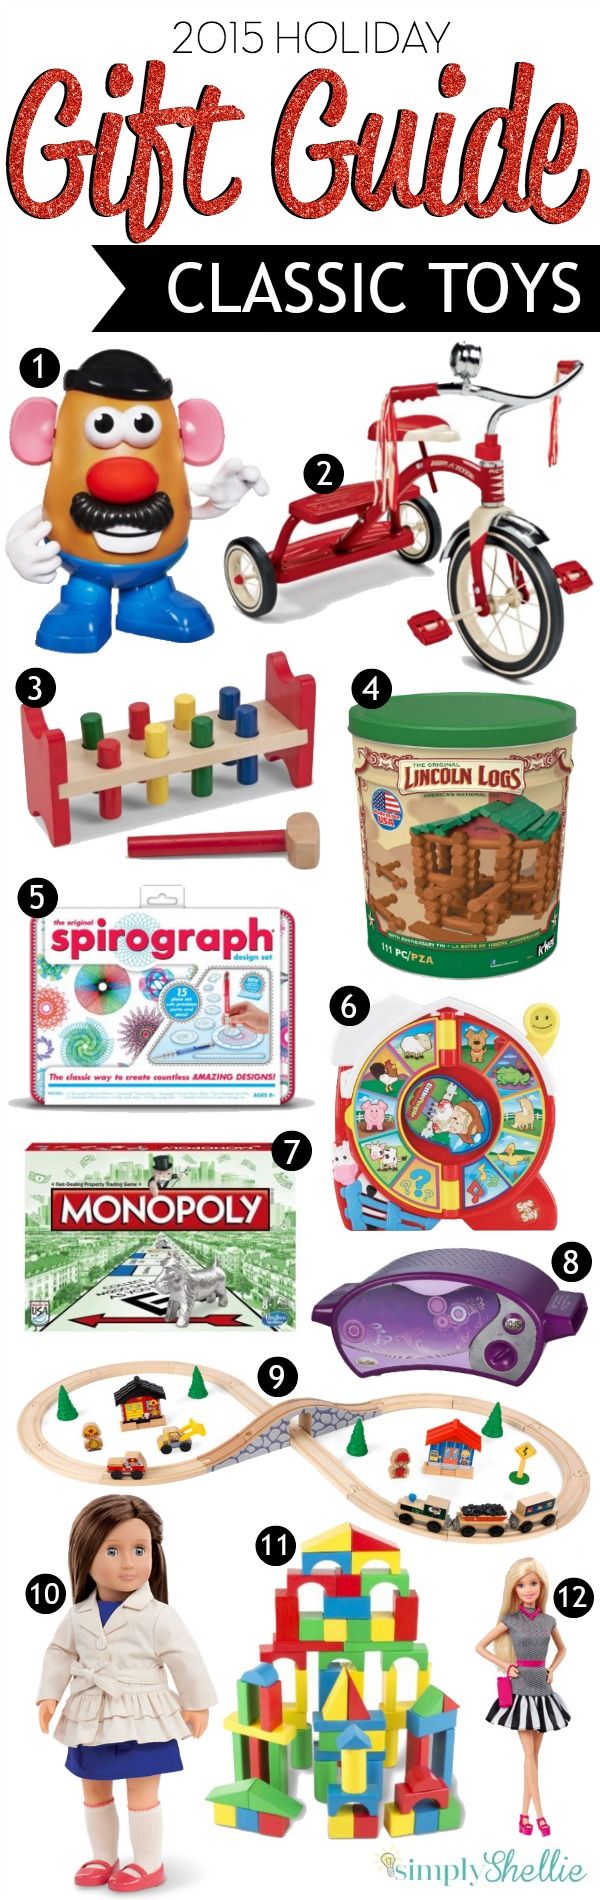 1000+ ideas about Classic Toys on Pinterest.